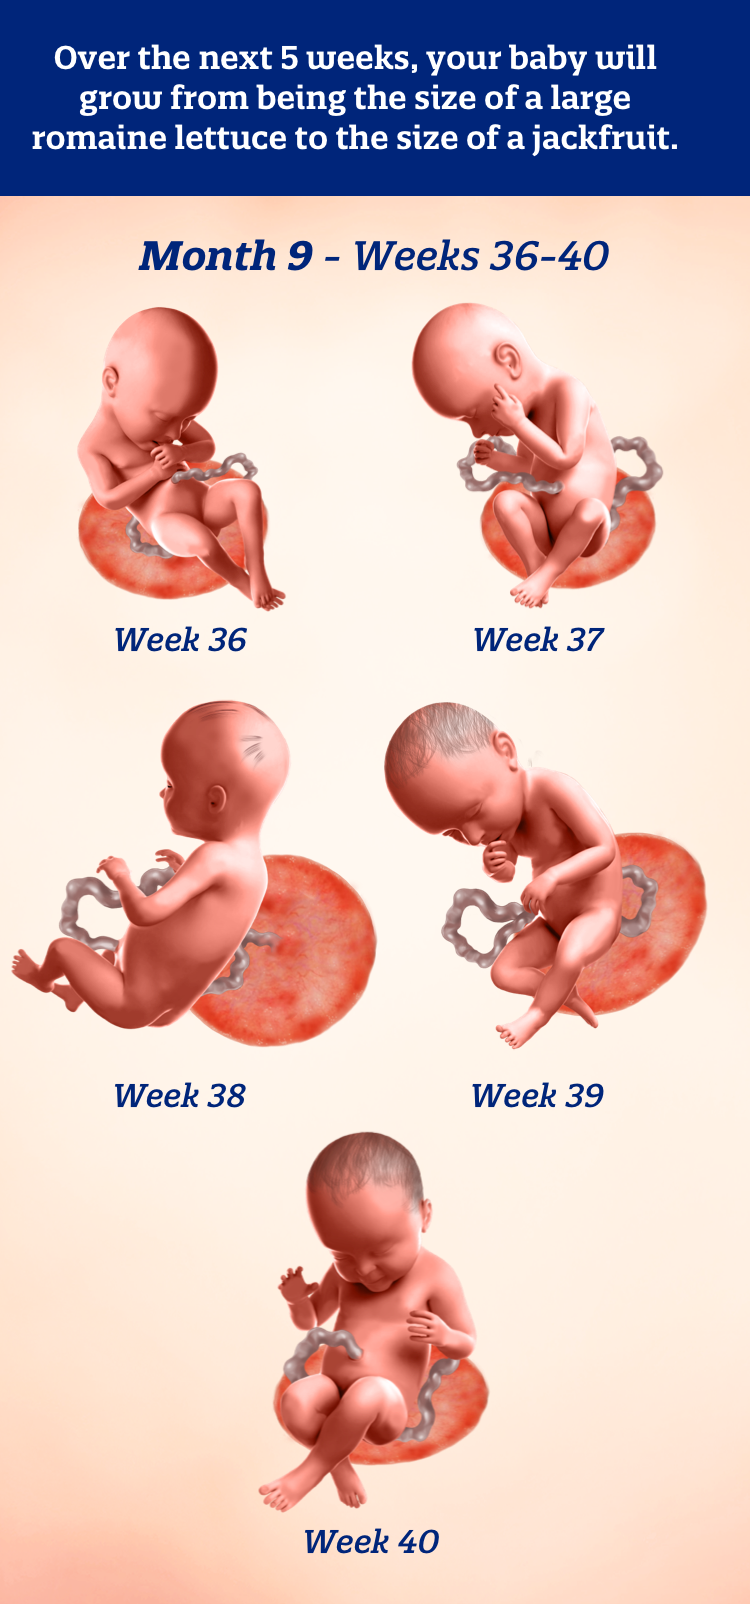 Month 9 weeks 36-40: Over the next 5 weeks, your baby will grow from being the size of a large romaine lettuce to the size of a jackfruit.